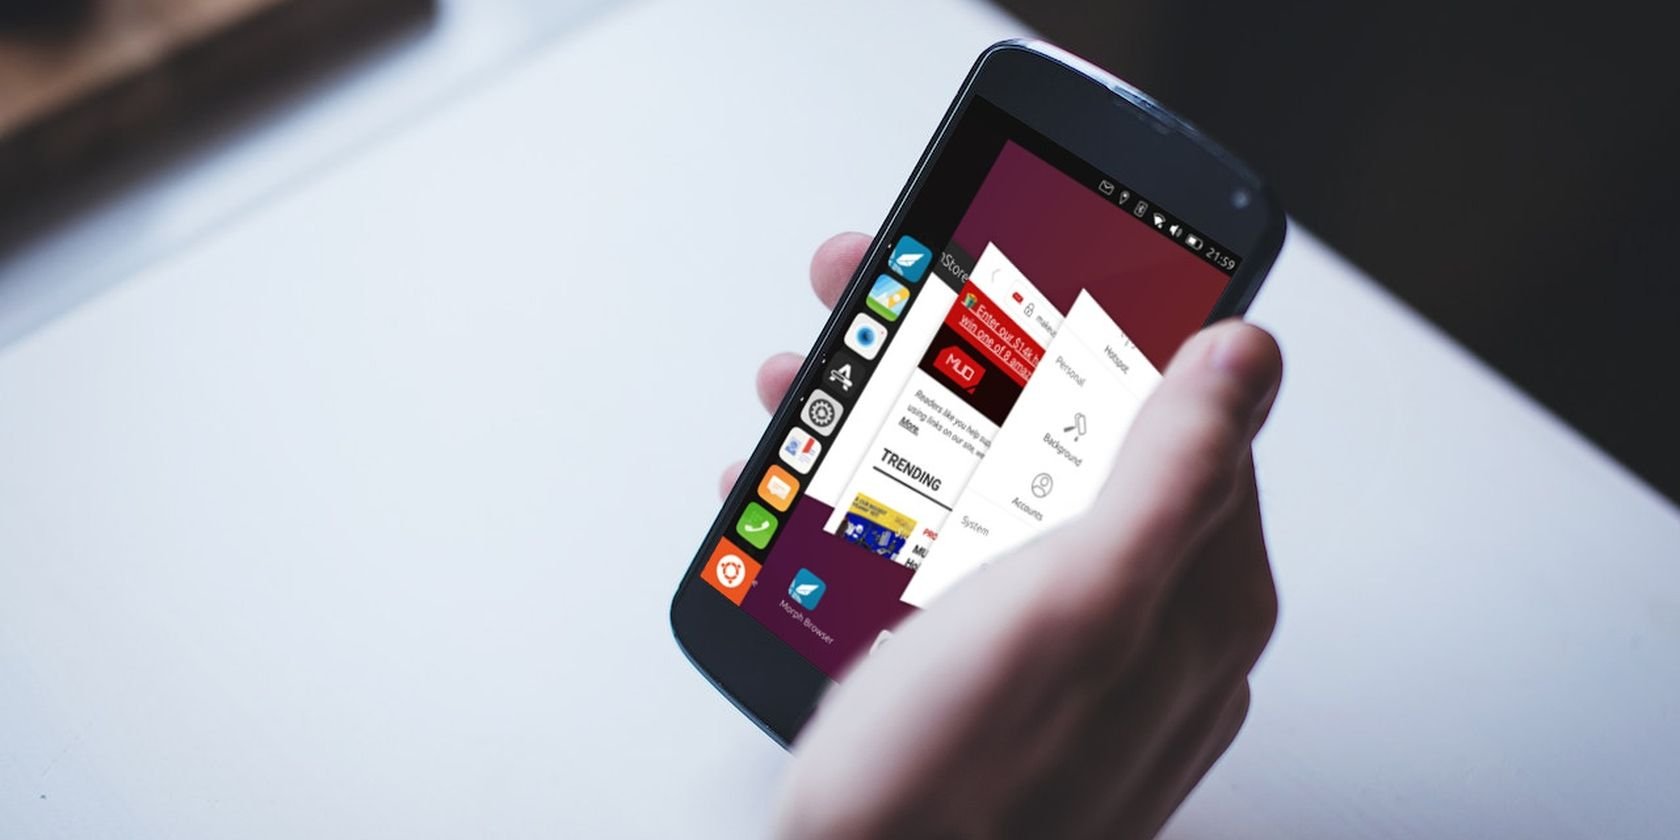 How to Install Ubuntu Touch on Your Mobile Phone